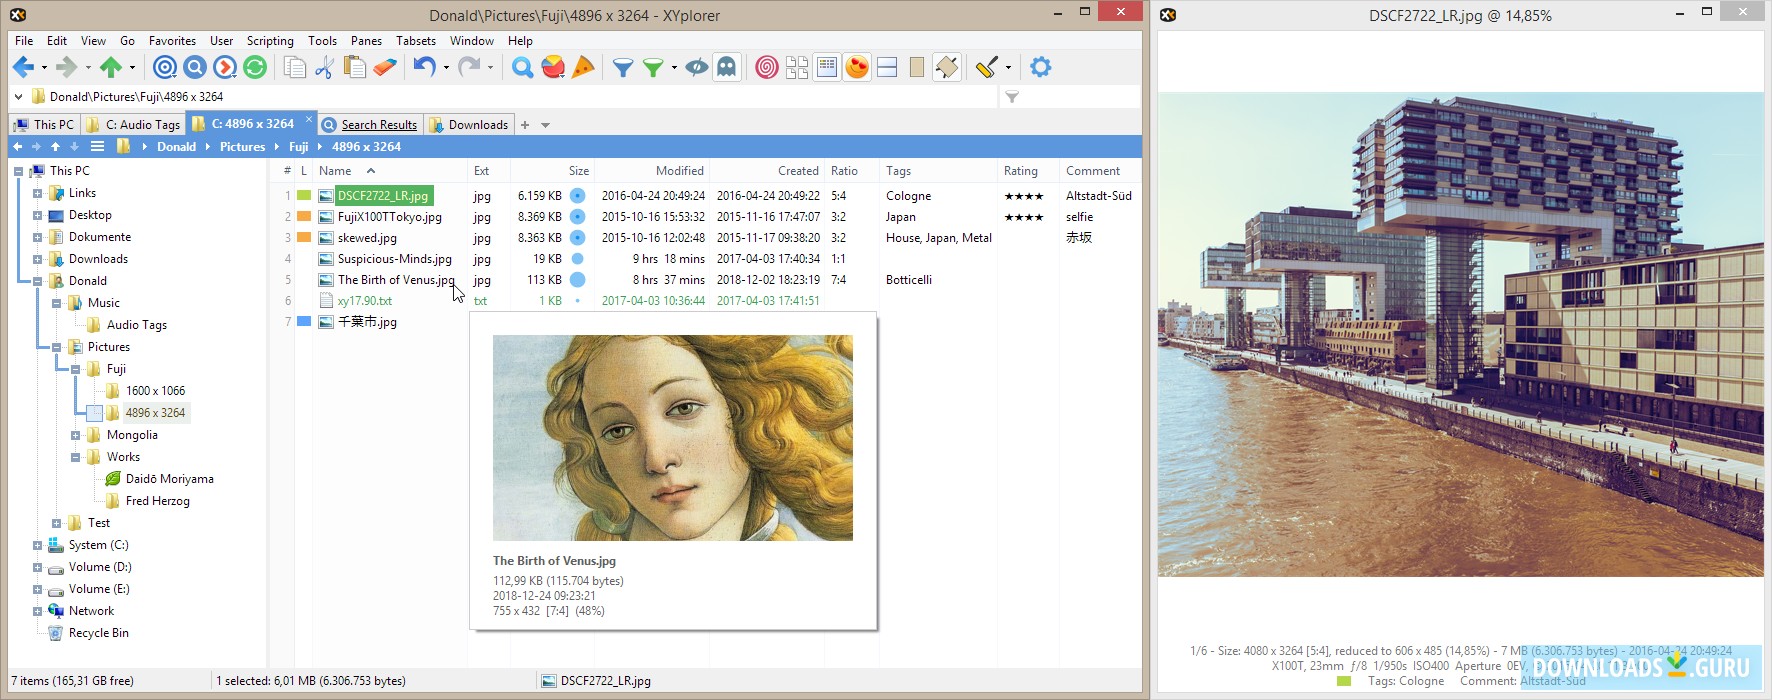 download the new for windows XYplorer 24.80.0000